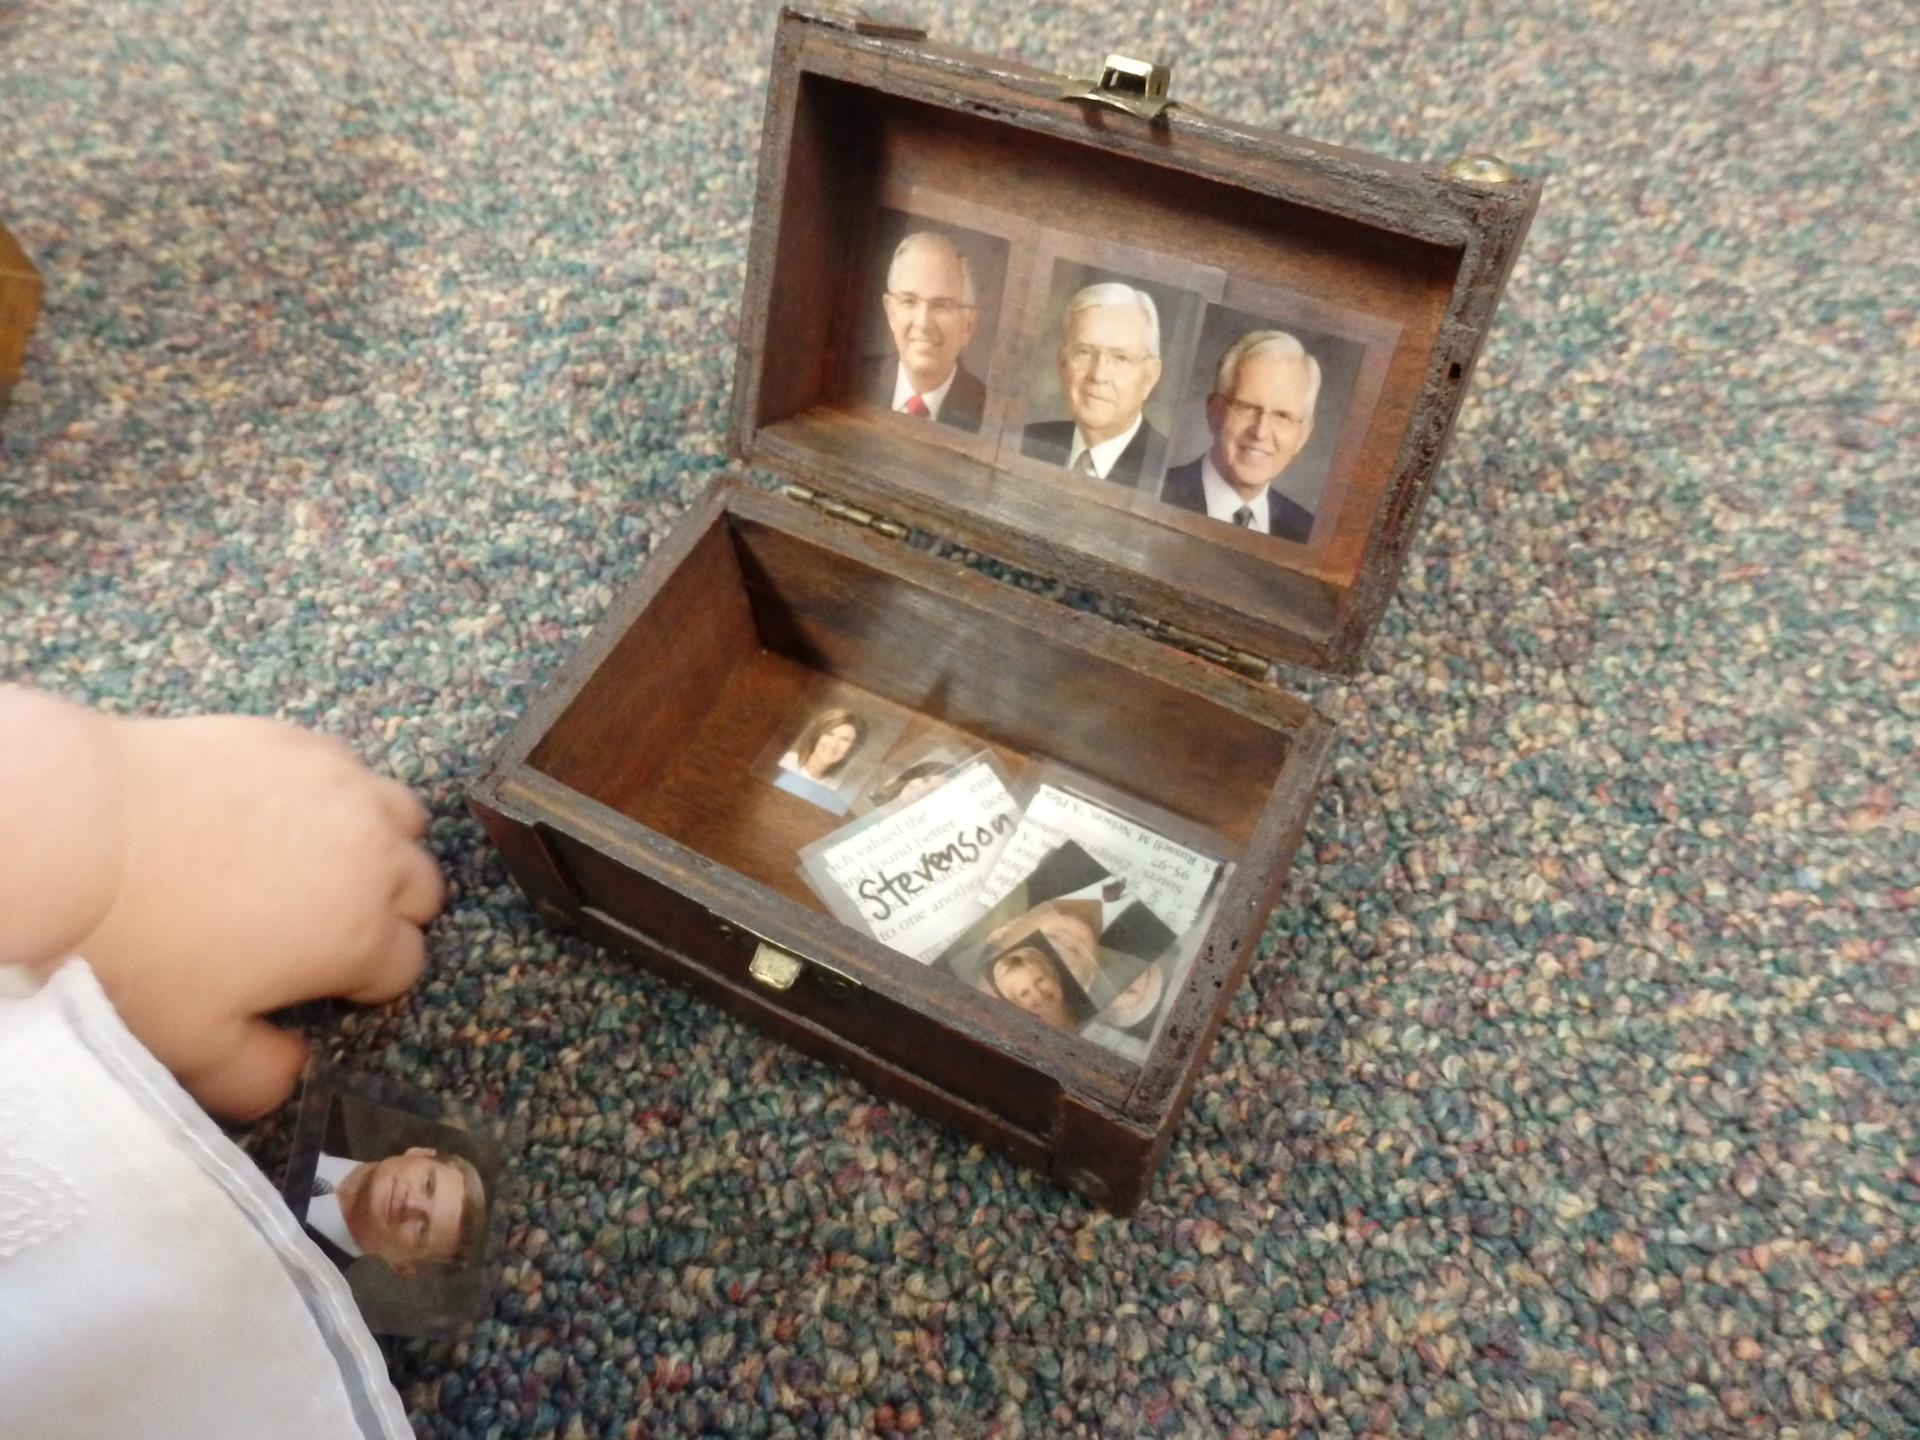 tiny treasure chest holding pictures of church leaders